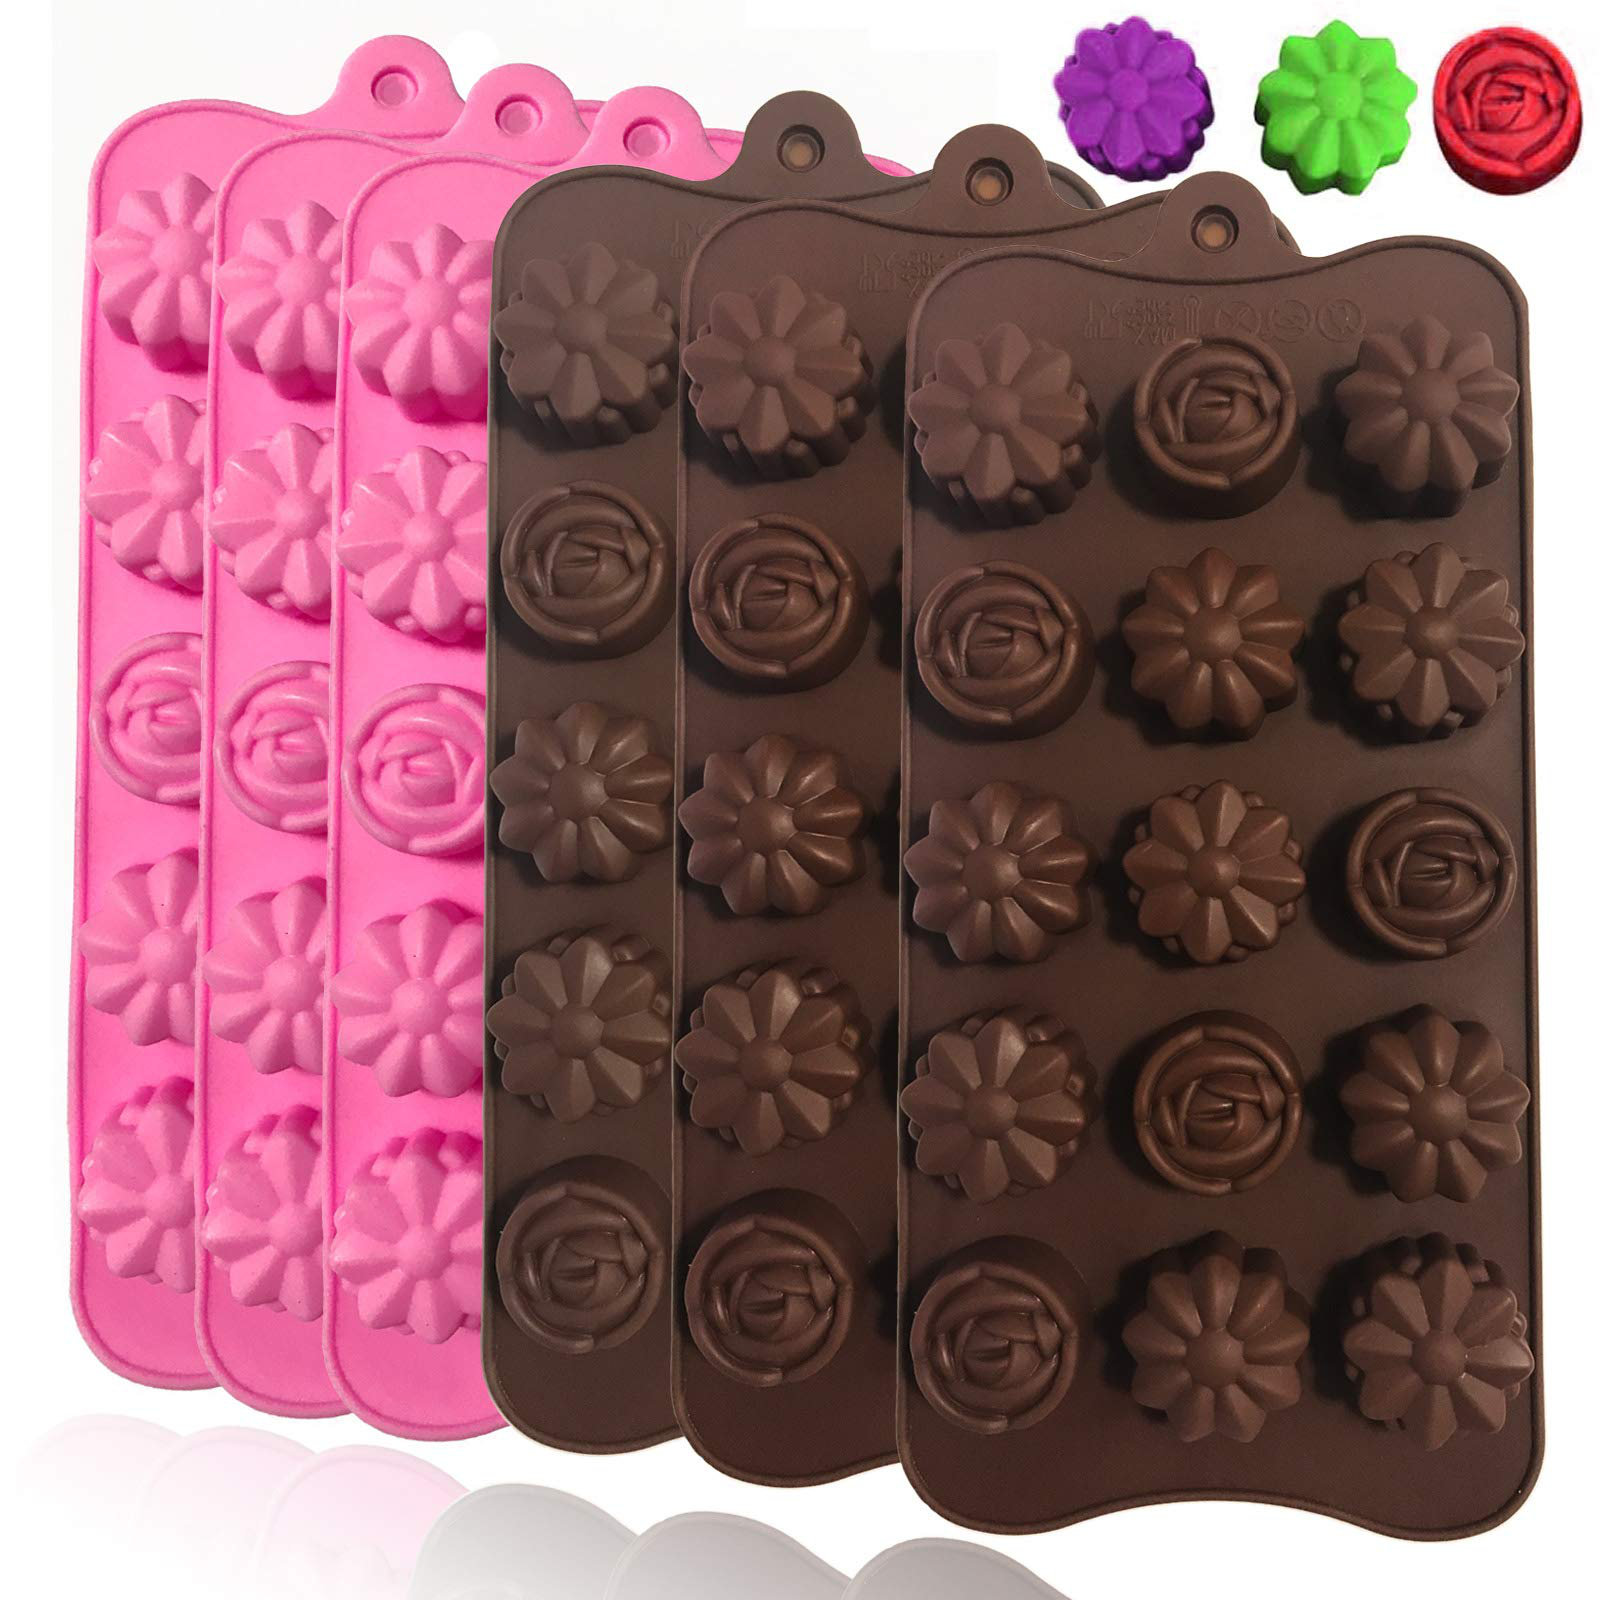 15 Cavity Animal DIY Soap Mold Jelly Ice Cake Chocolate Silicone Moulds 